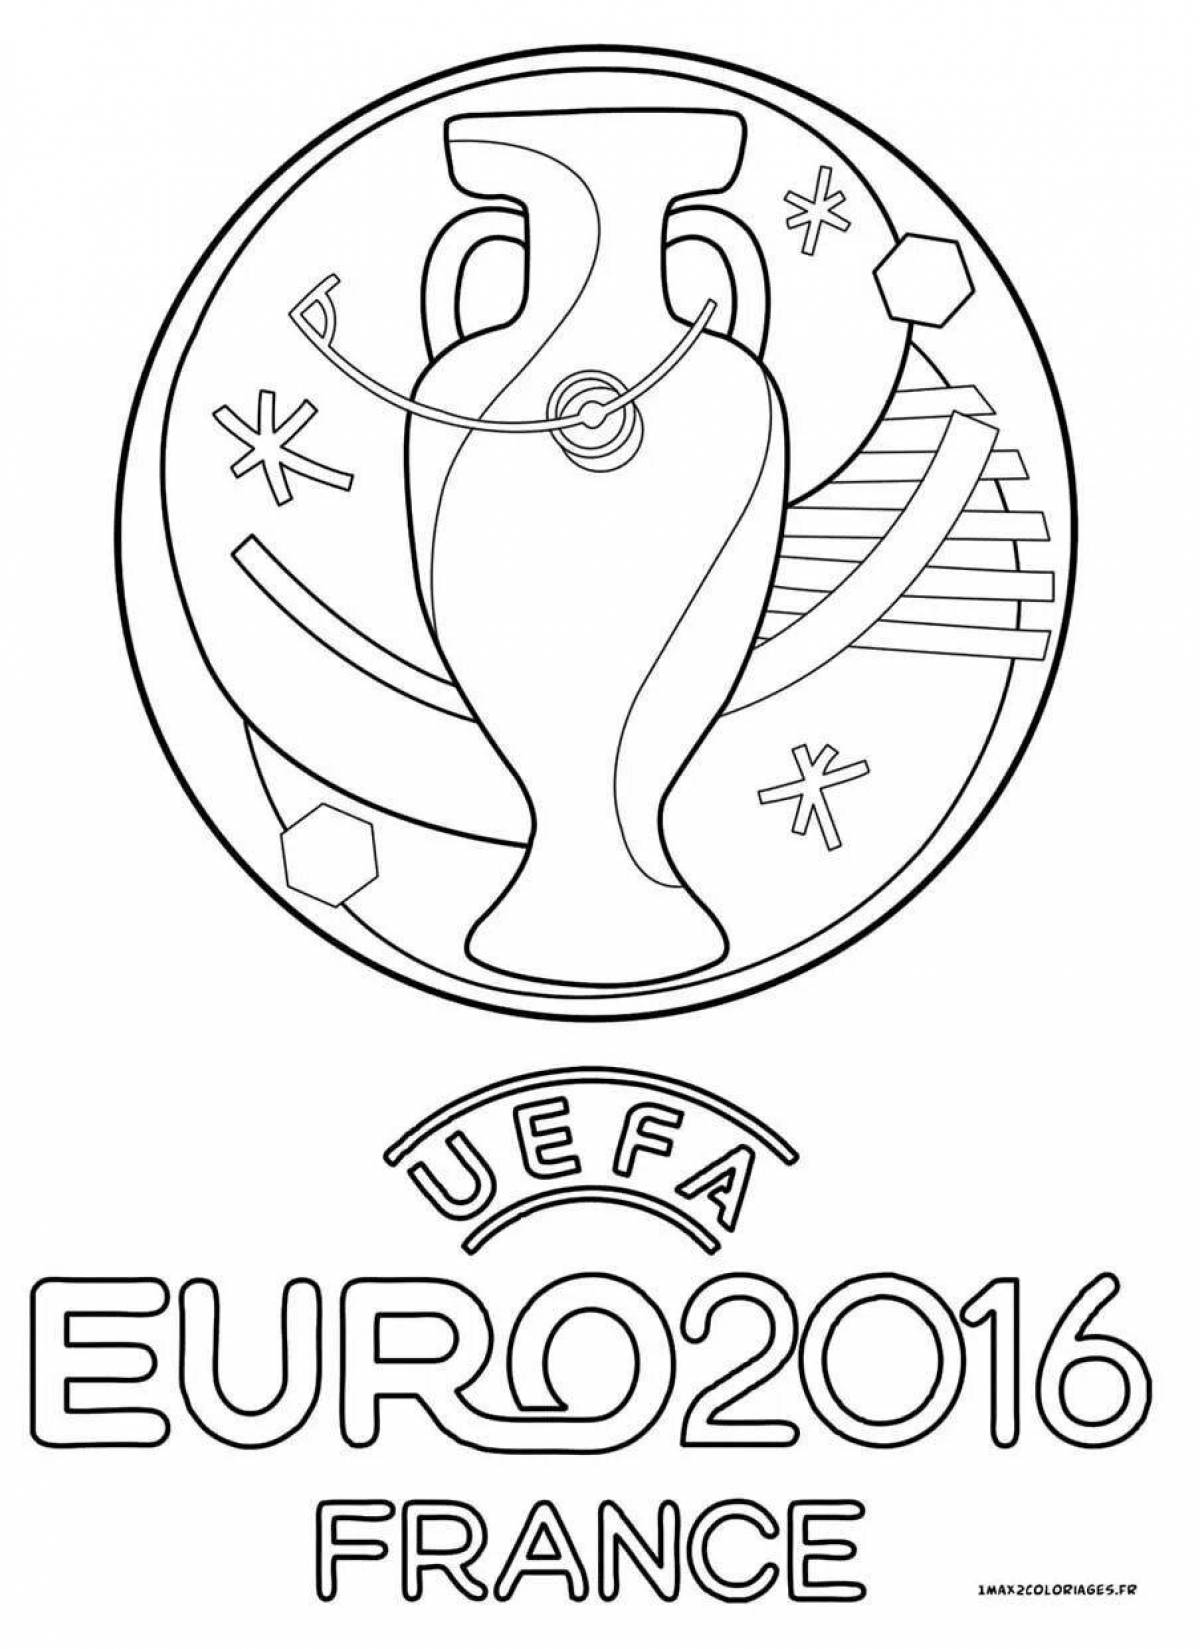 Animated World Cup coloring book